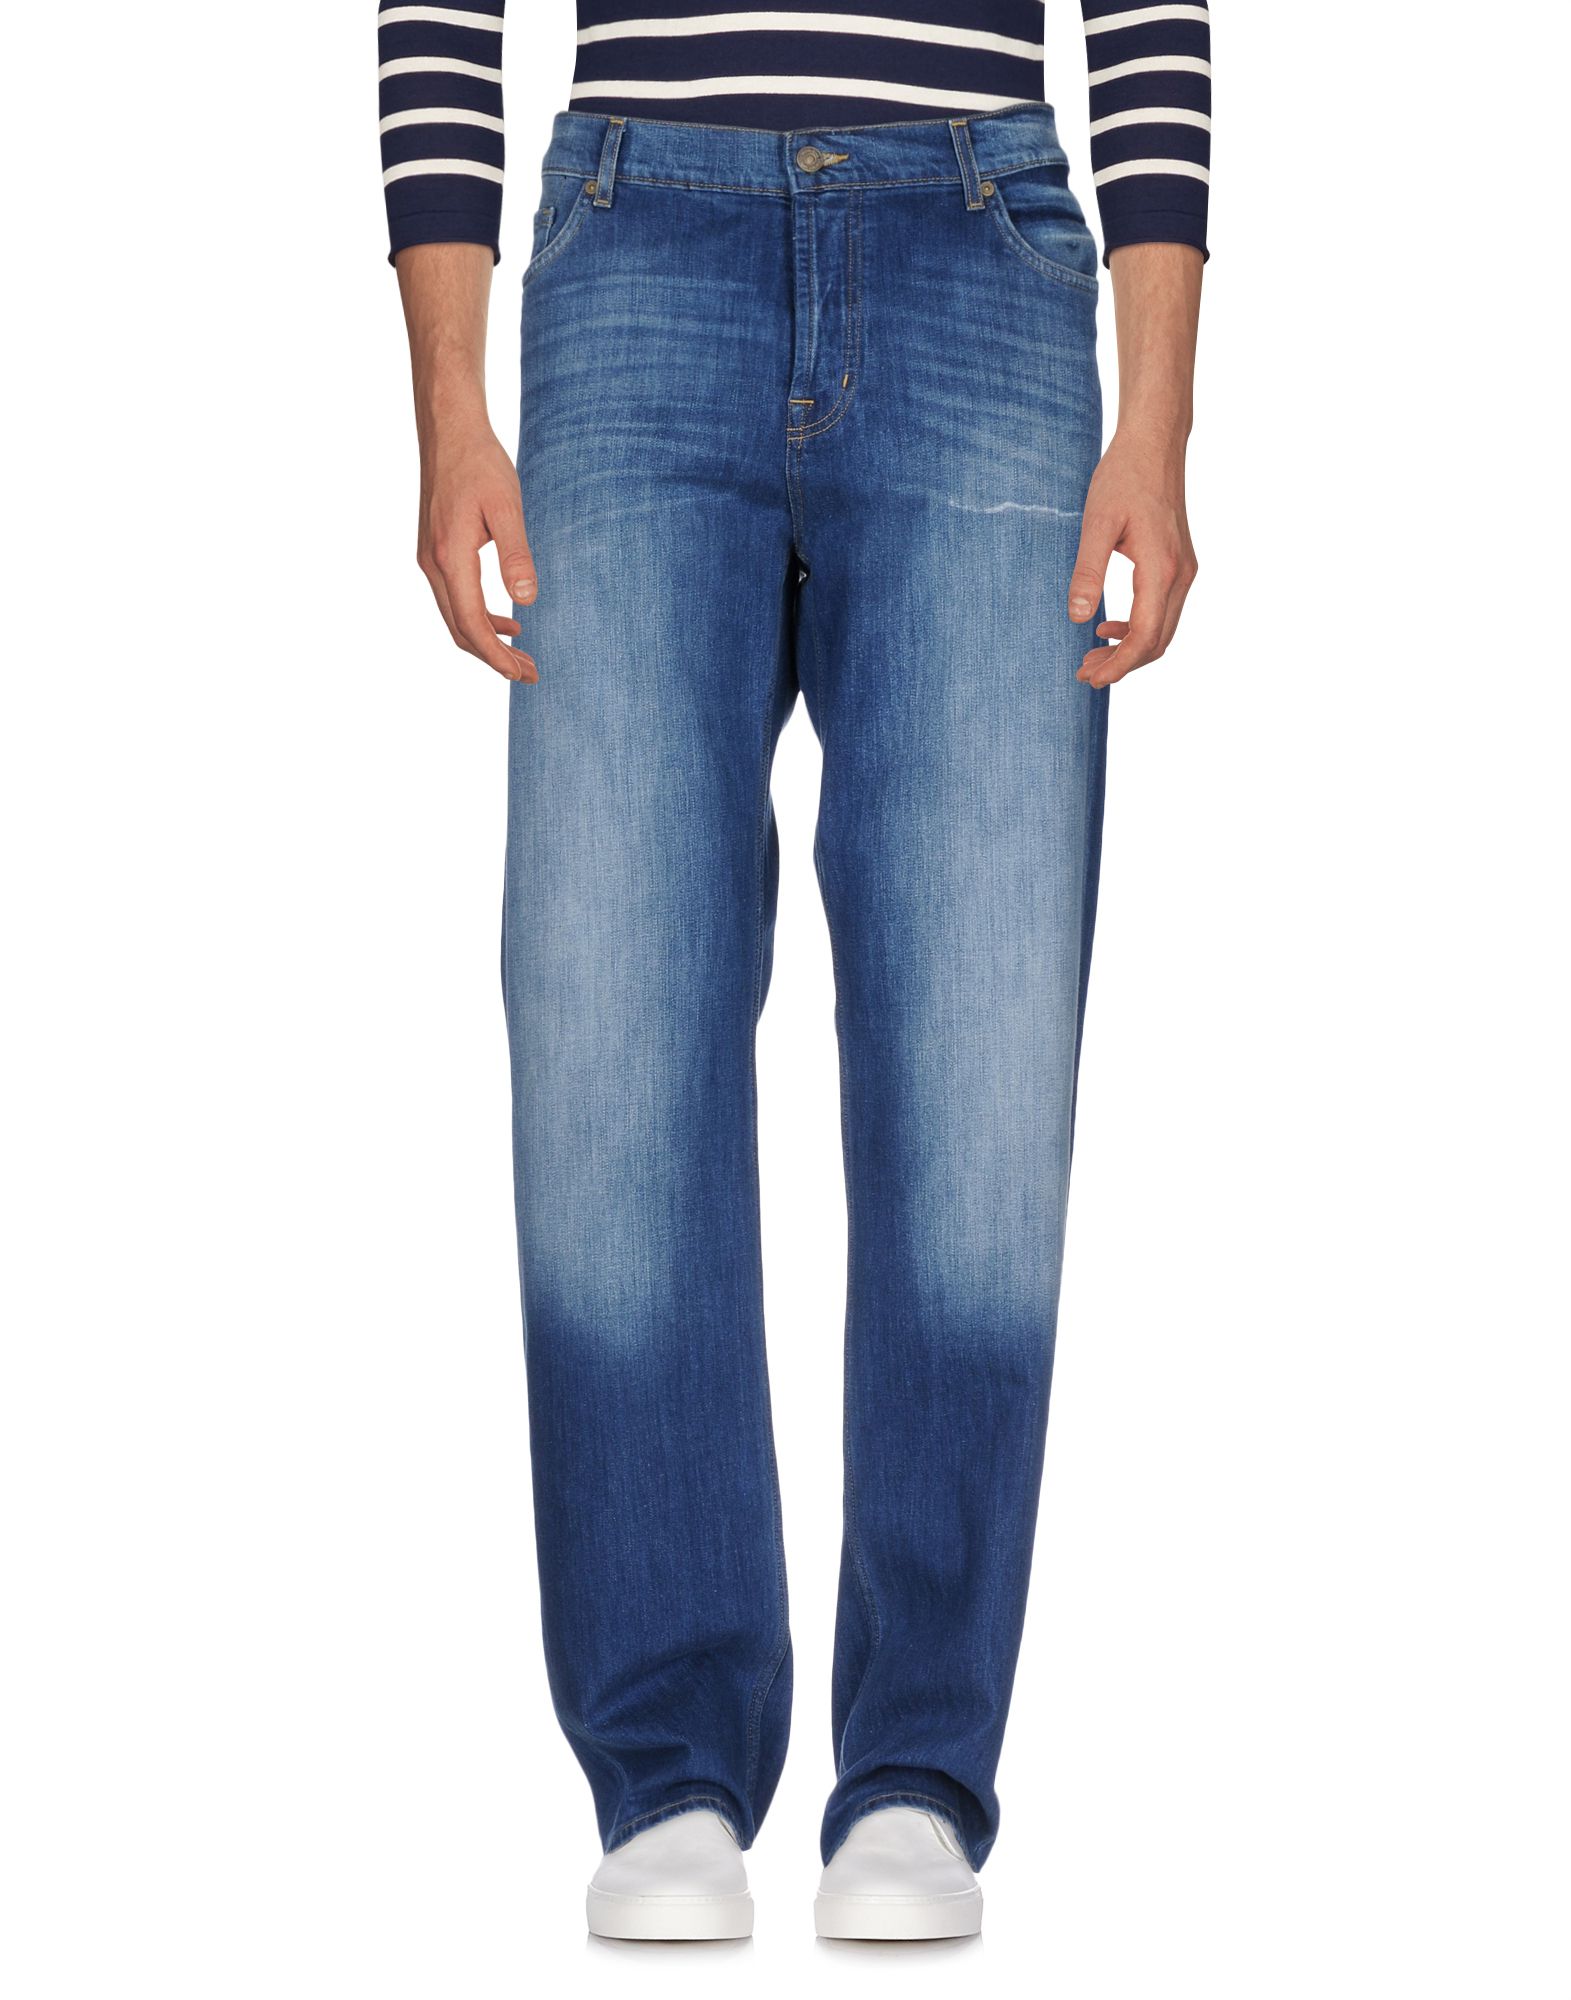 7 FOR ALL MANKIND Denim pants,42645980PX 14